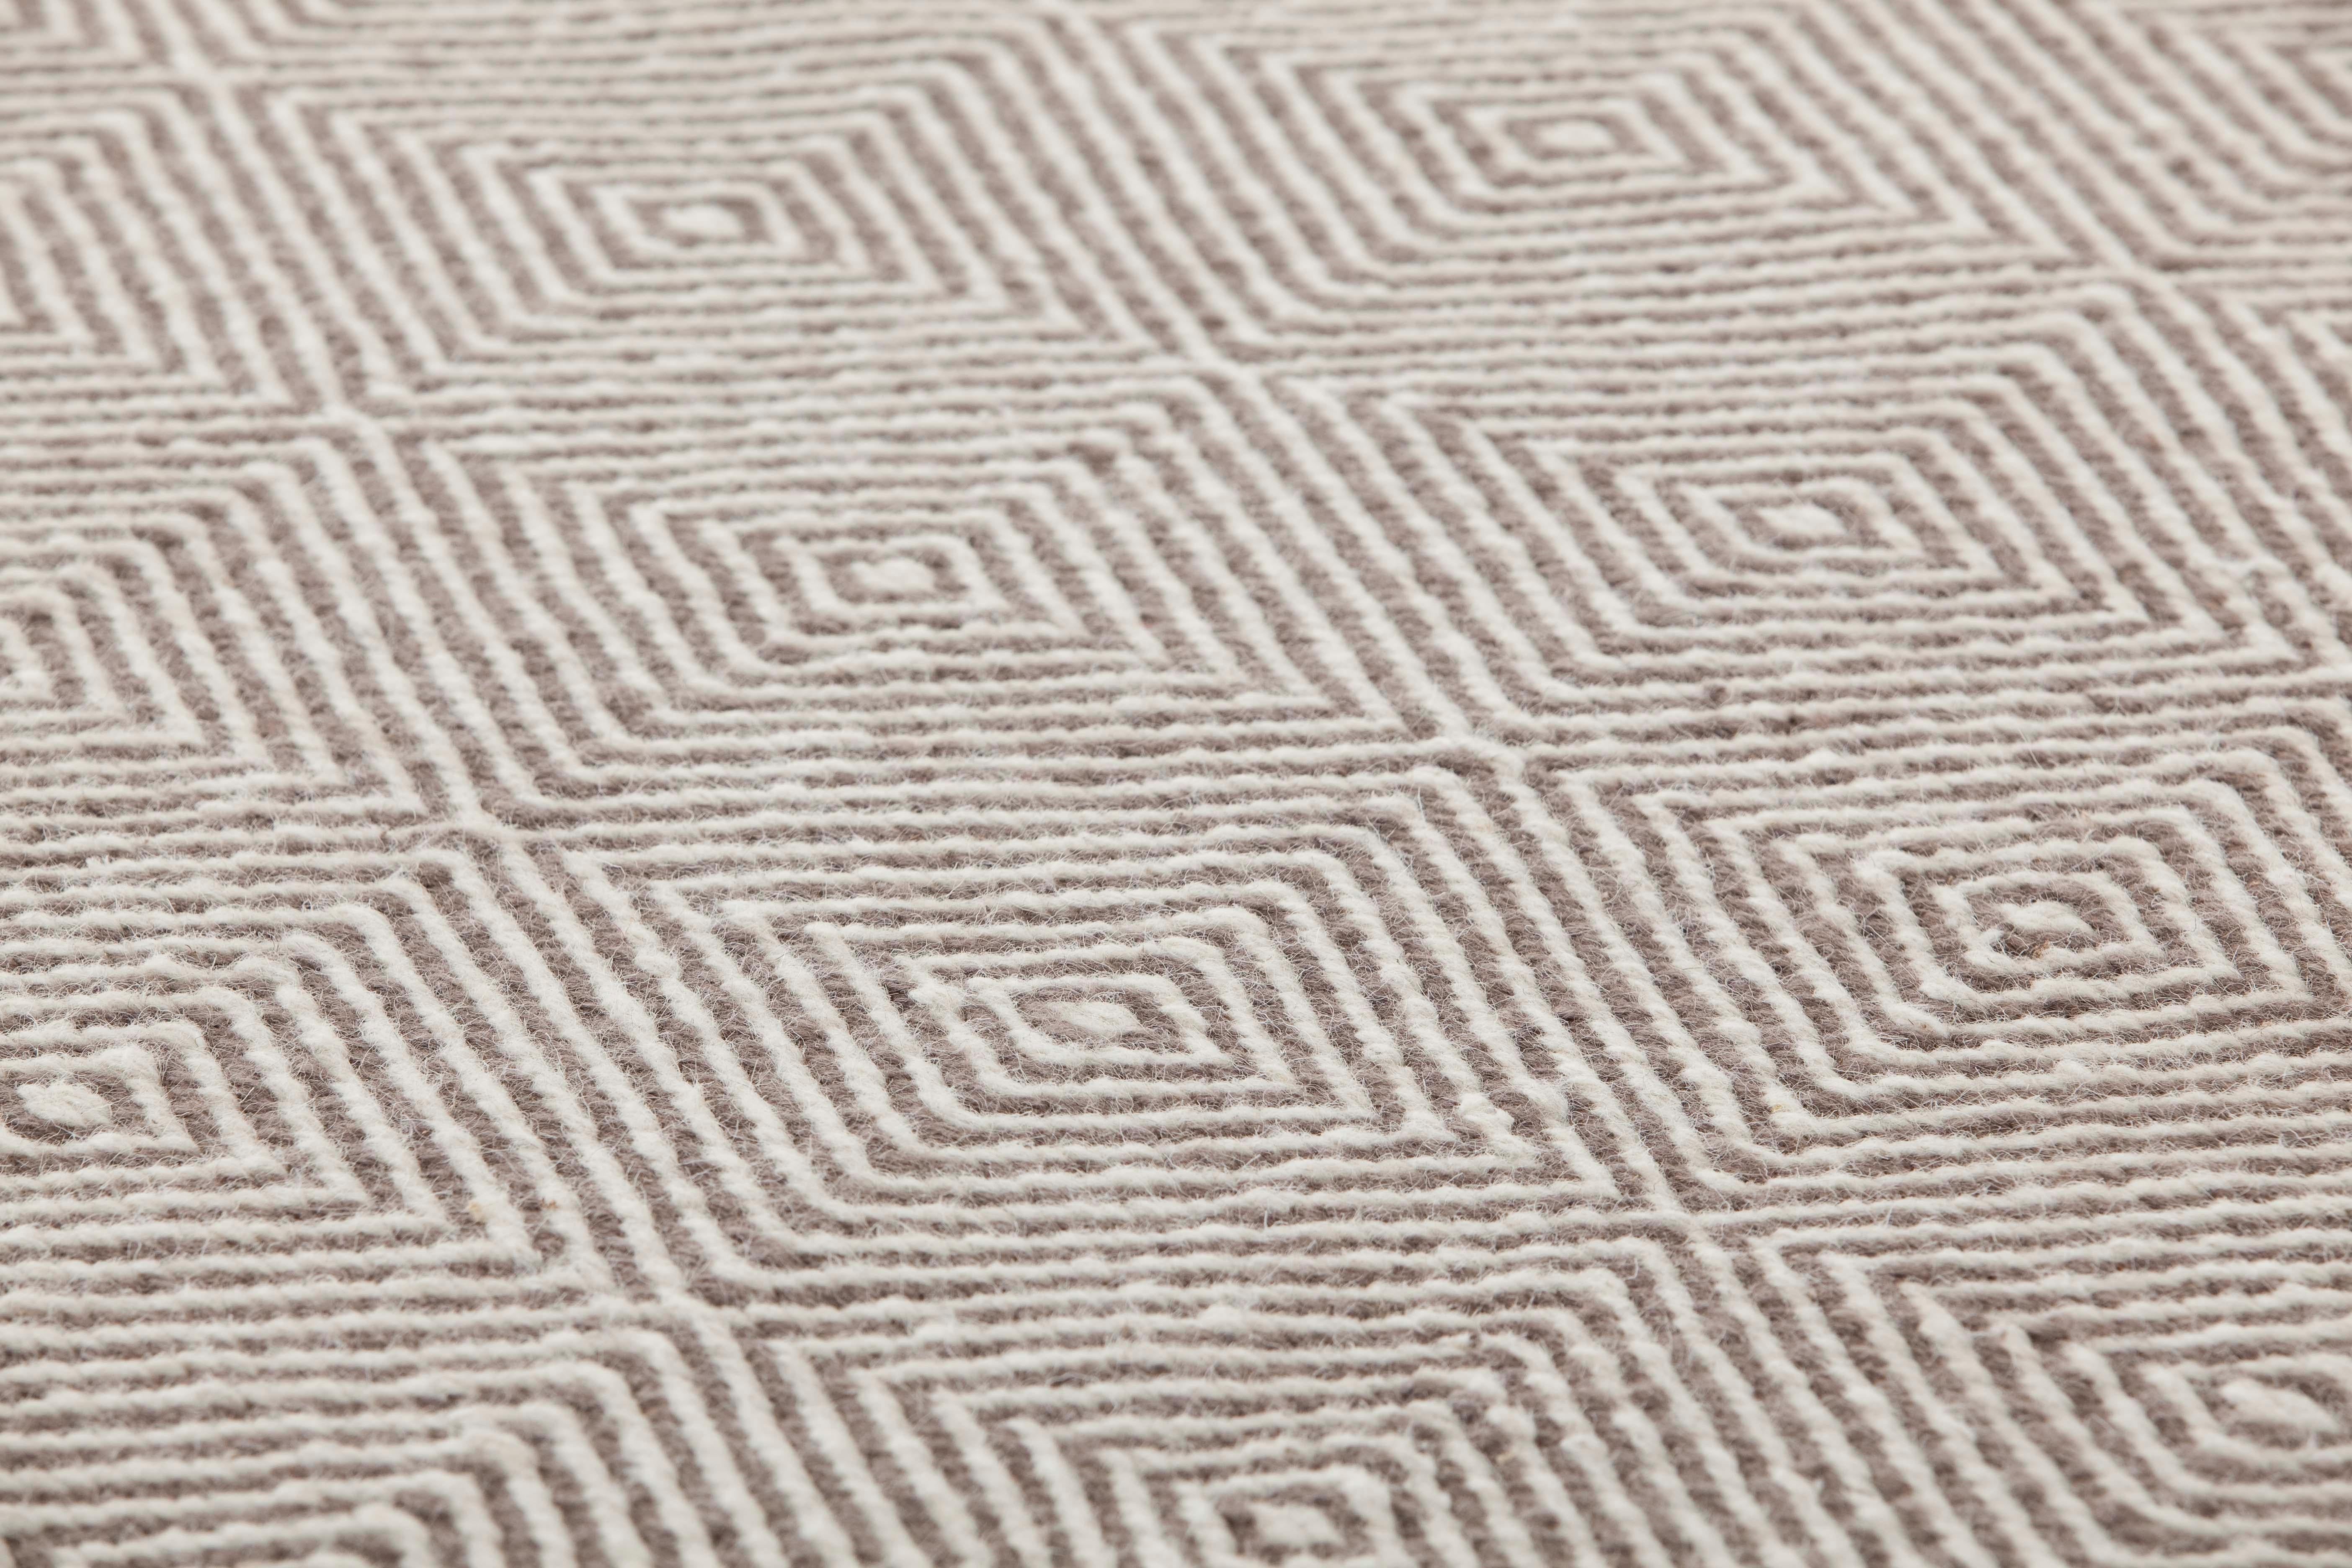 Dhurrie wool is transformed and grows in volume. Urban, sober and essential, it reveals myriad new possibilities. 

Additional information:
Material: Jute. 100% wool. Reversible
Color: Taupe
Technique: Dhurrie
Dimensions: 59 W x 79 D x 0.39 H